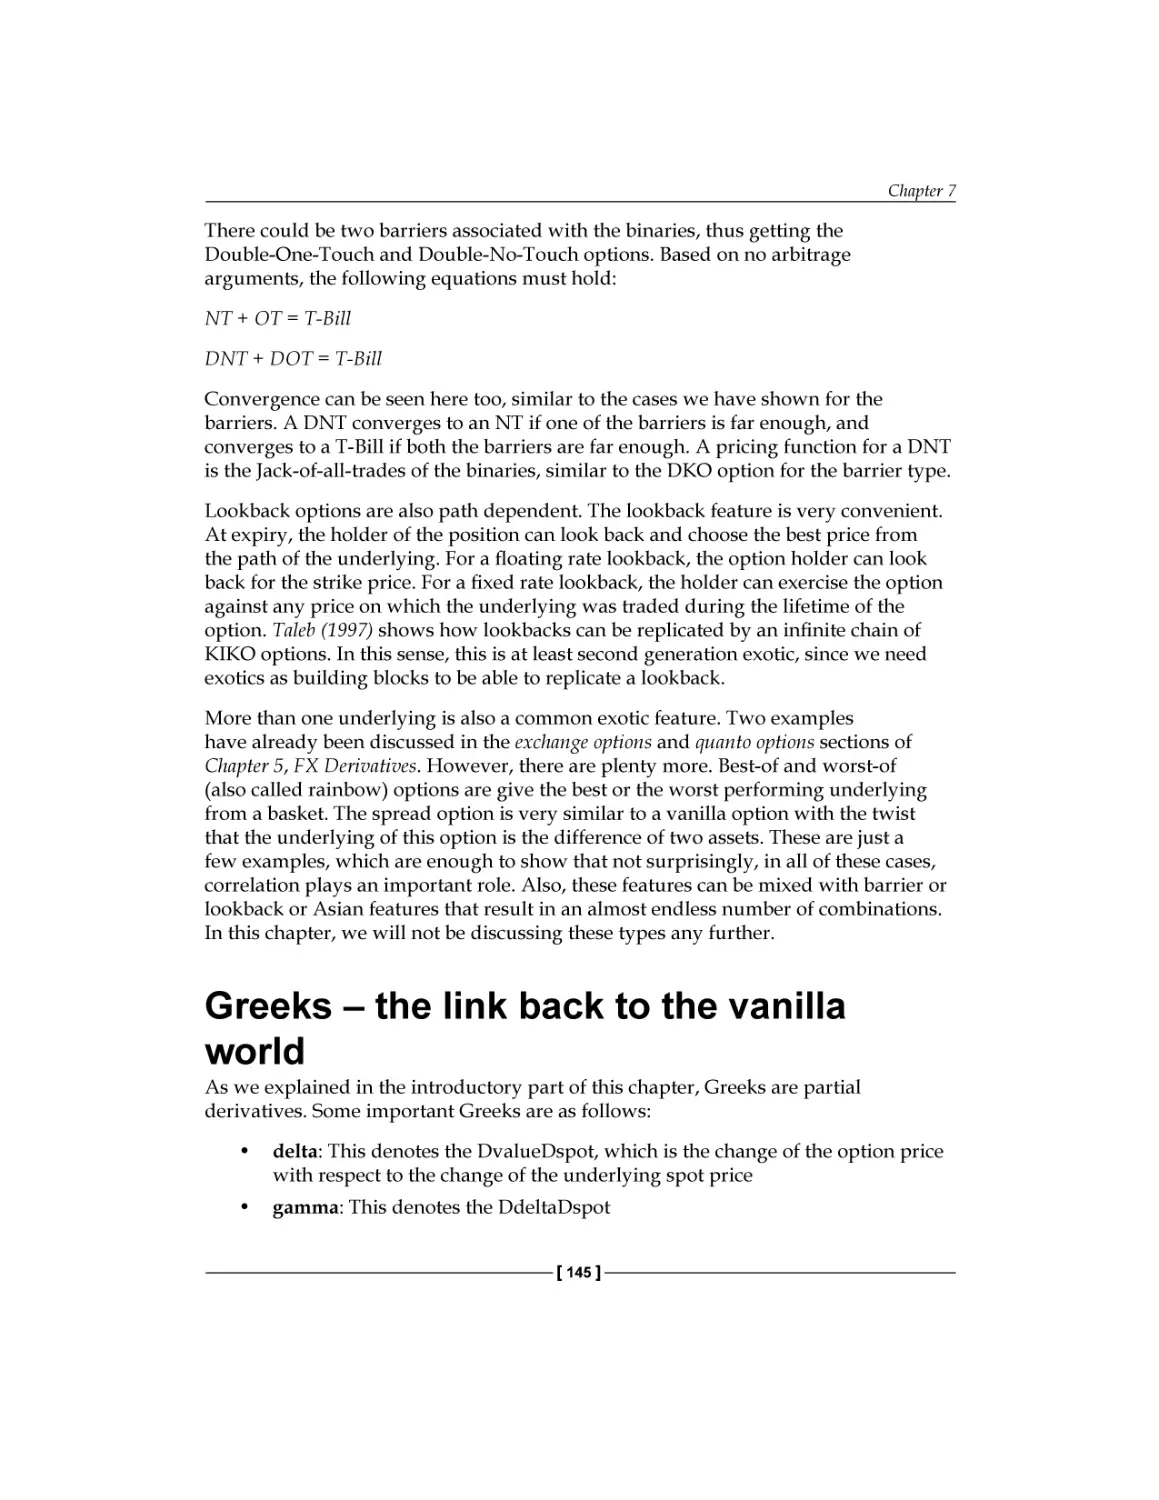 Greeks – the link back to the vanilla world